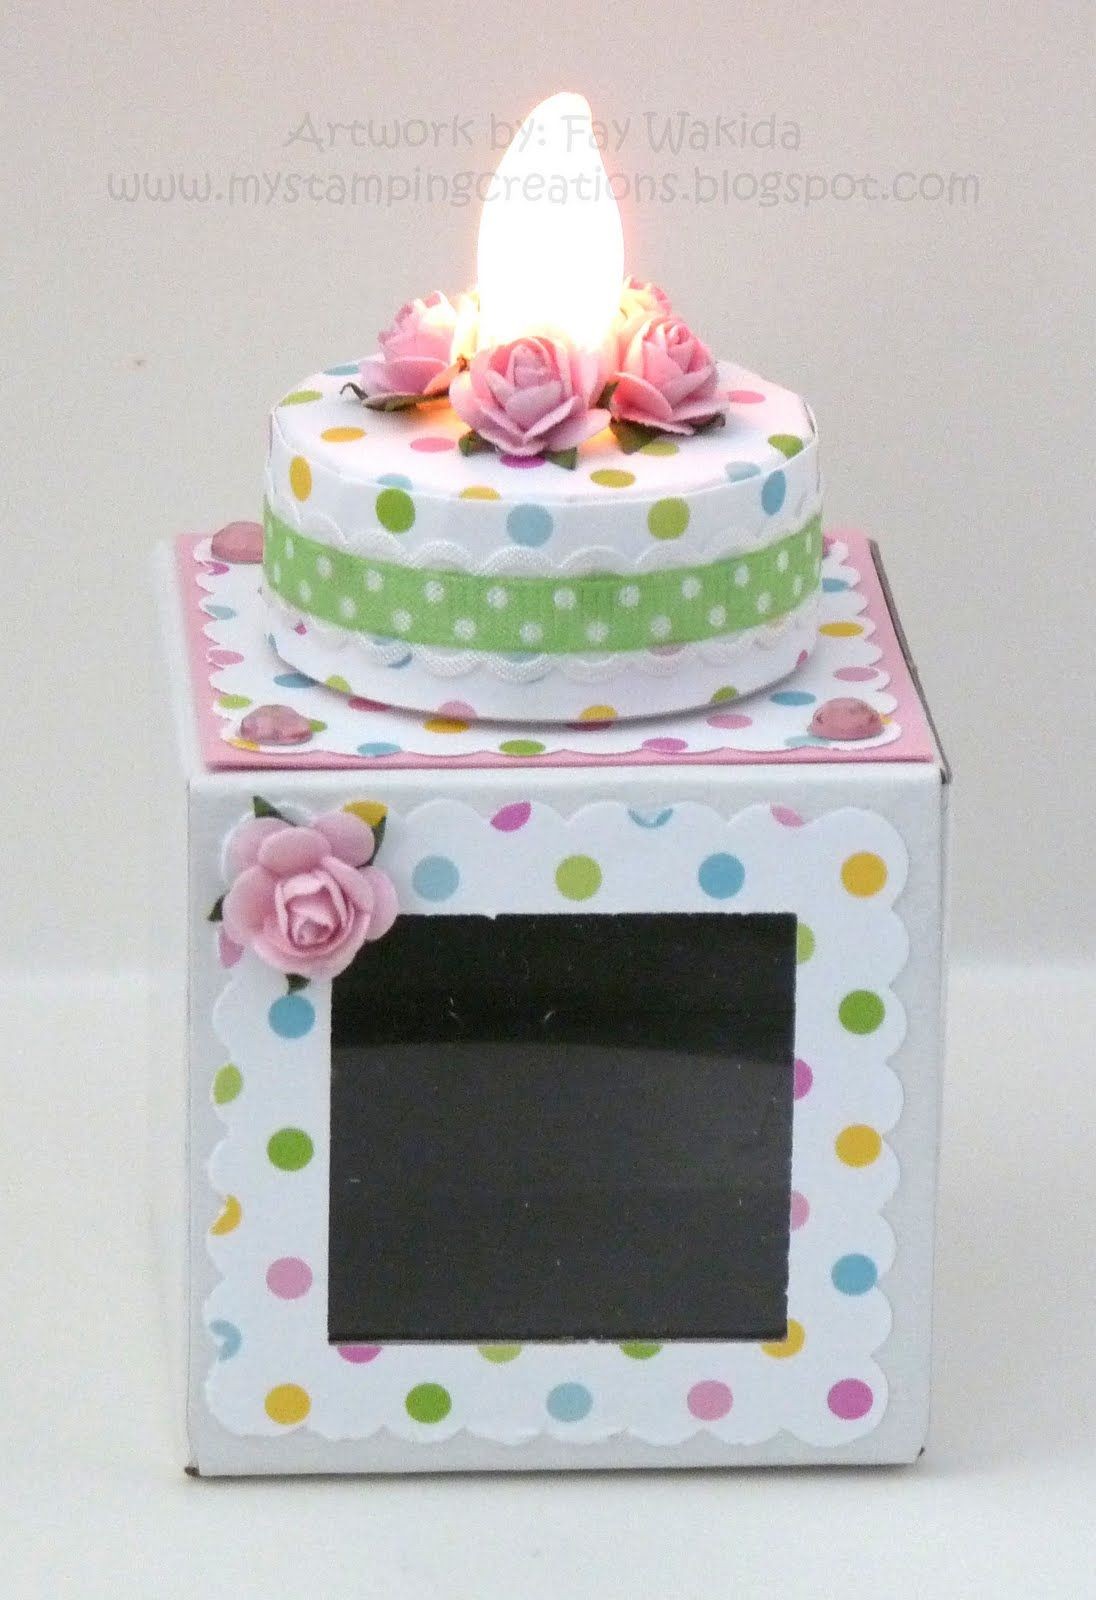 Papercraft Cake I Ve Been soooo Out Of the Crafting Mood I Hadn T Finished Any